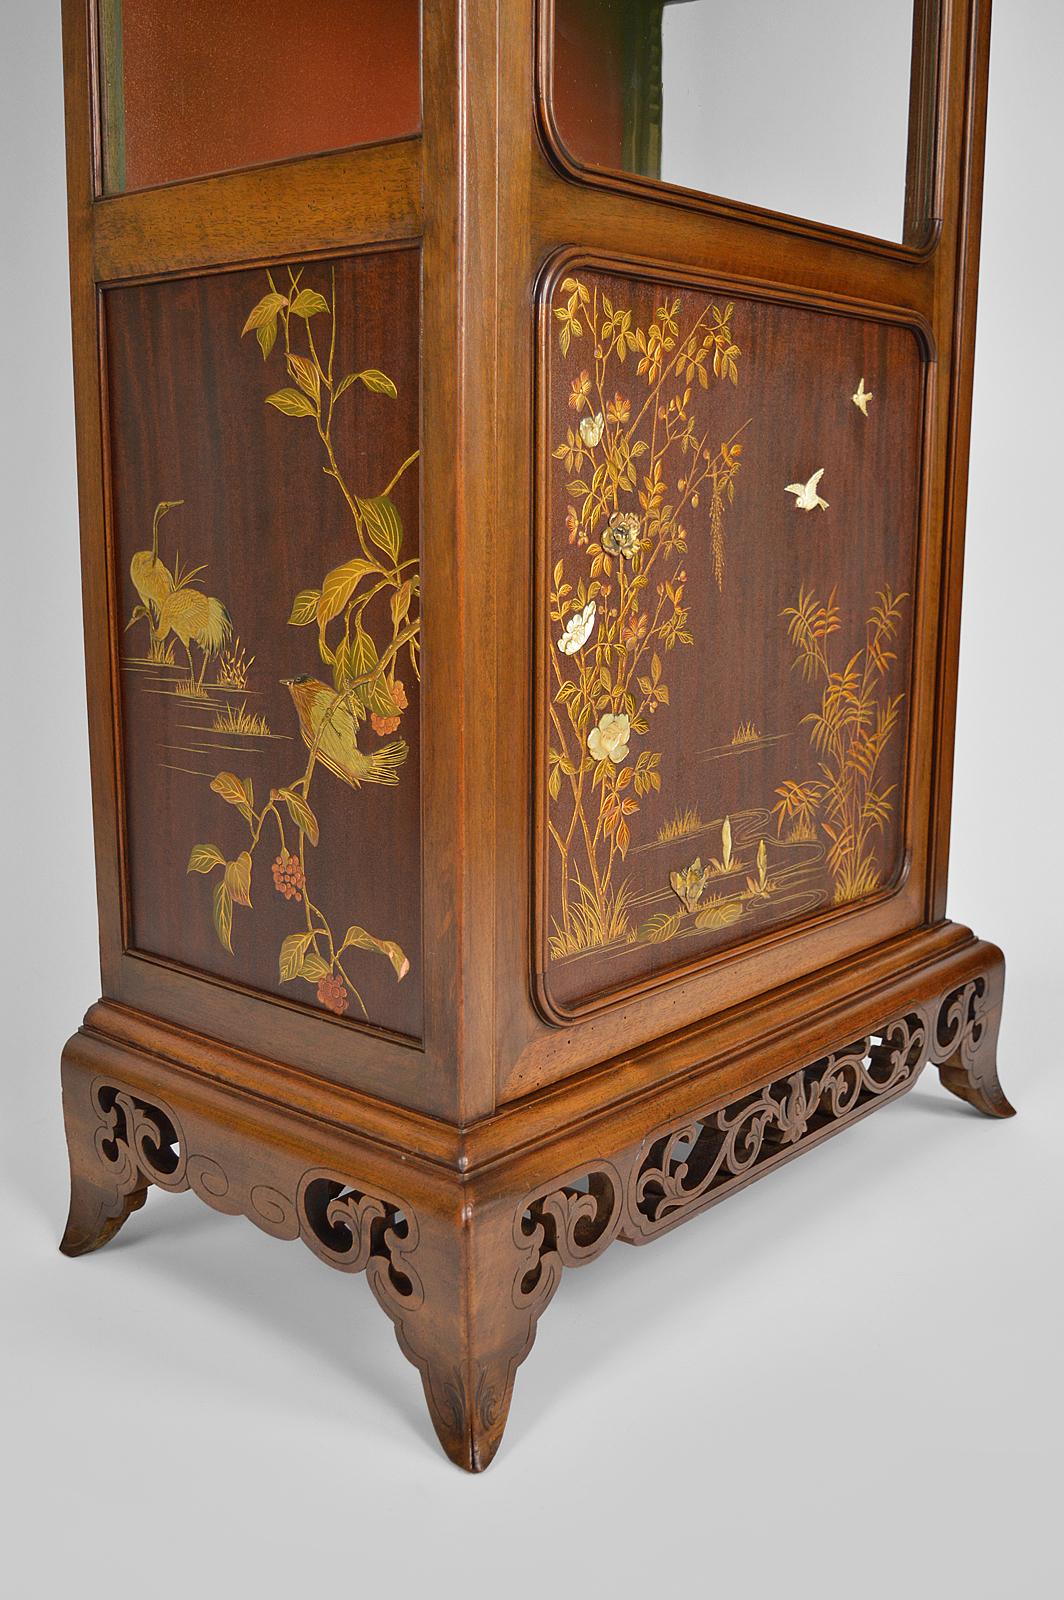 Late 19th Century Showcase with Inlaid Panels, attributed to Perret and Vibert, Japonisme, 1880